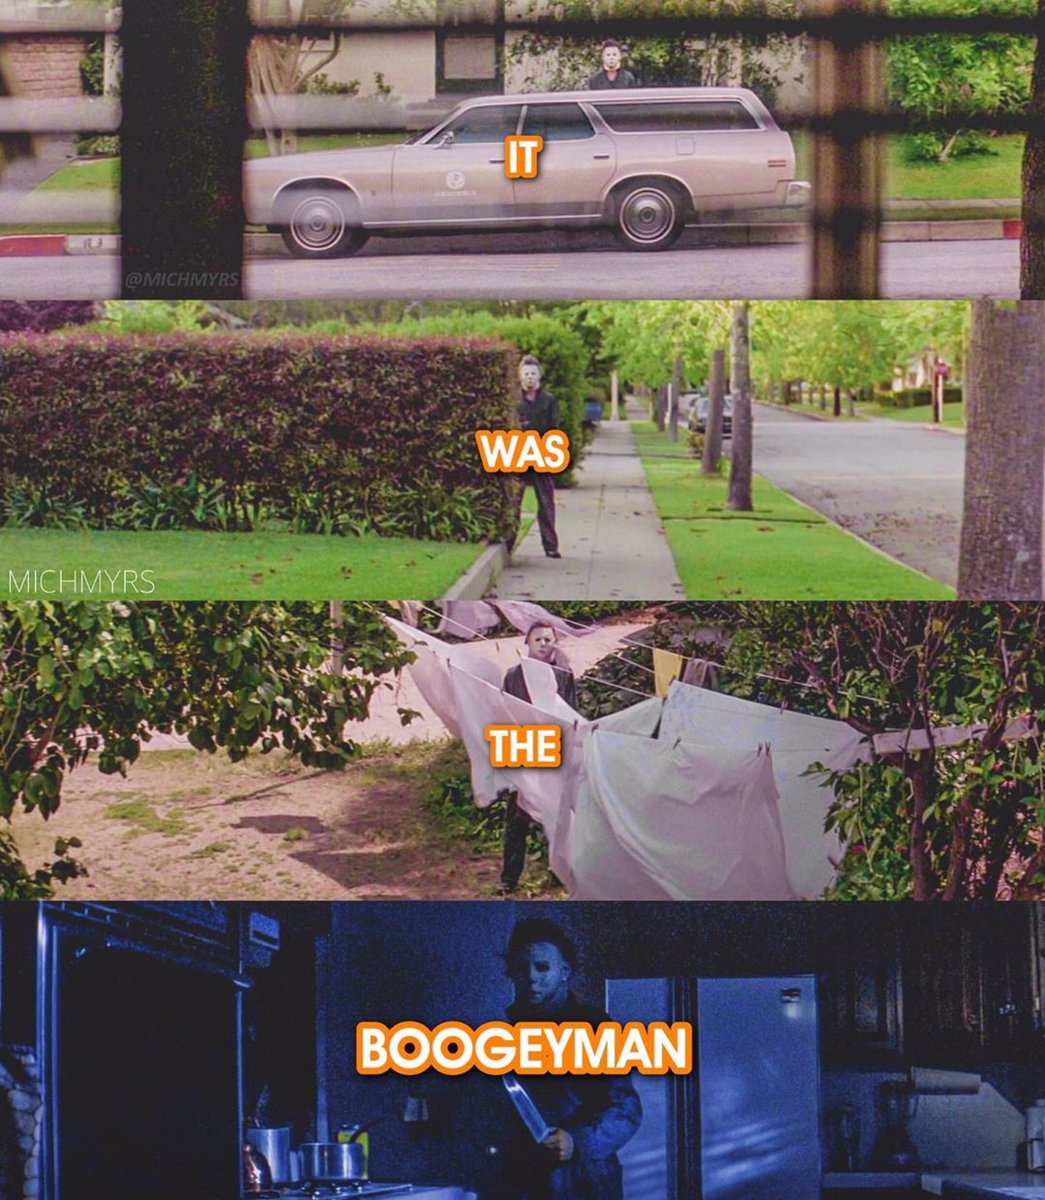 HALLOWEEN (1978)

— Which scene is your favorite? And why?

#TheBoogeyman #SlasherFilm #TheShape